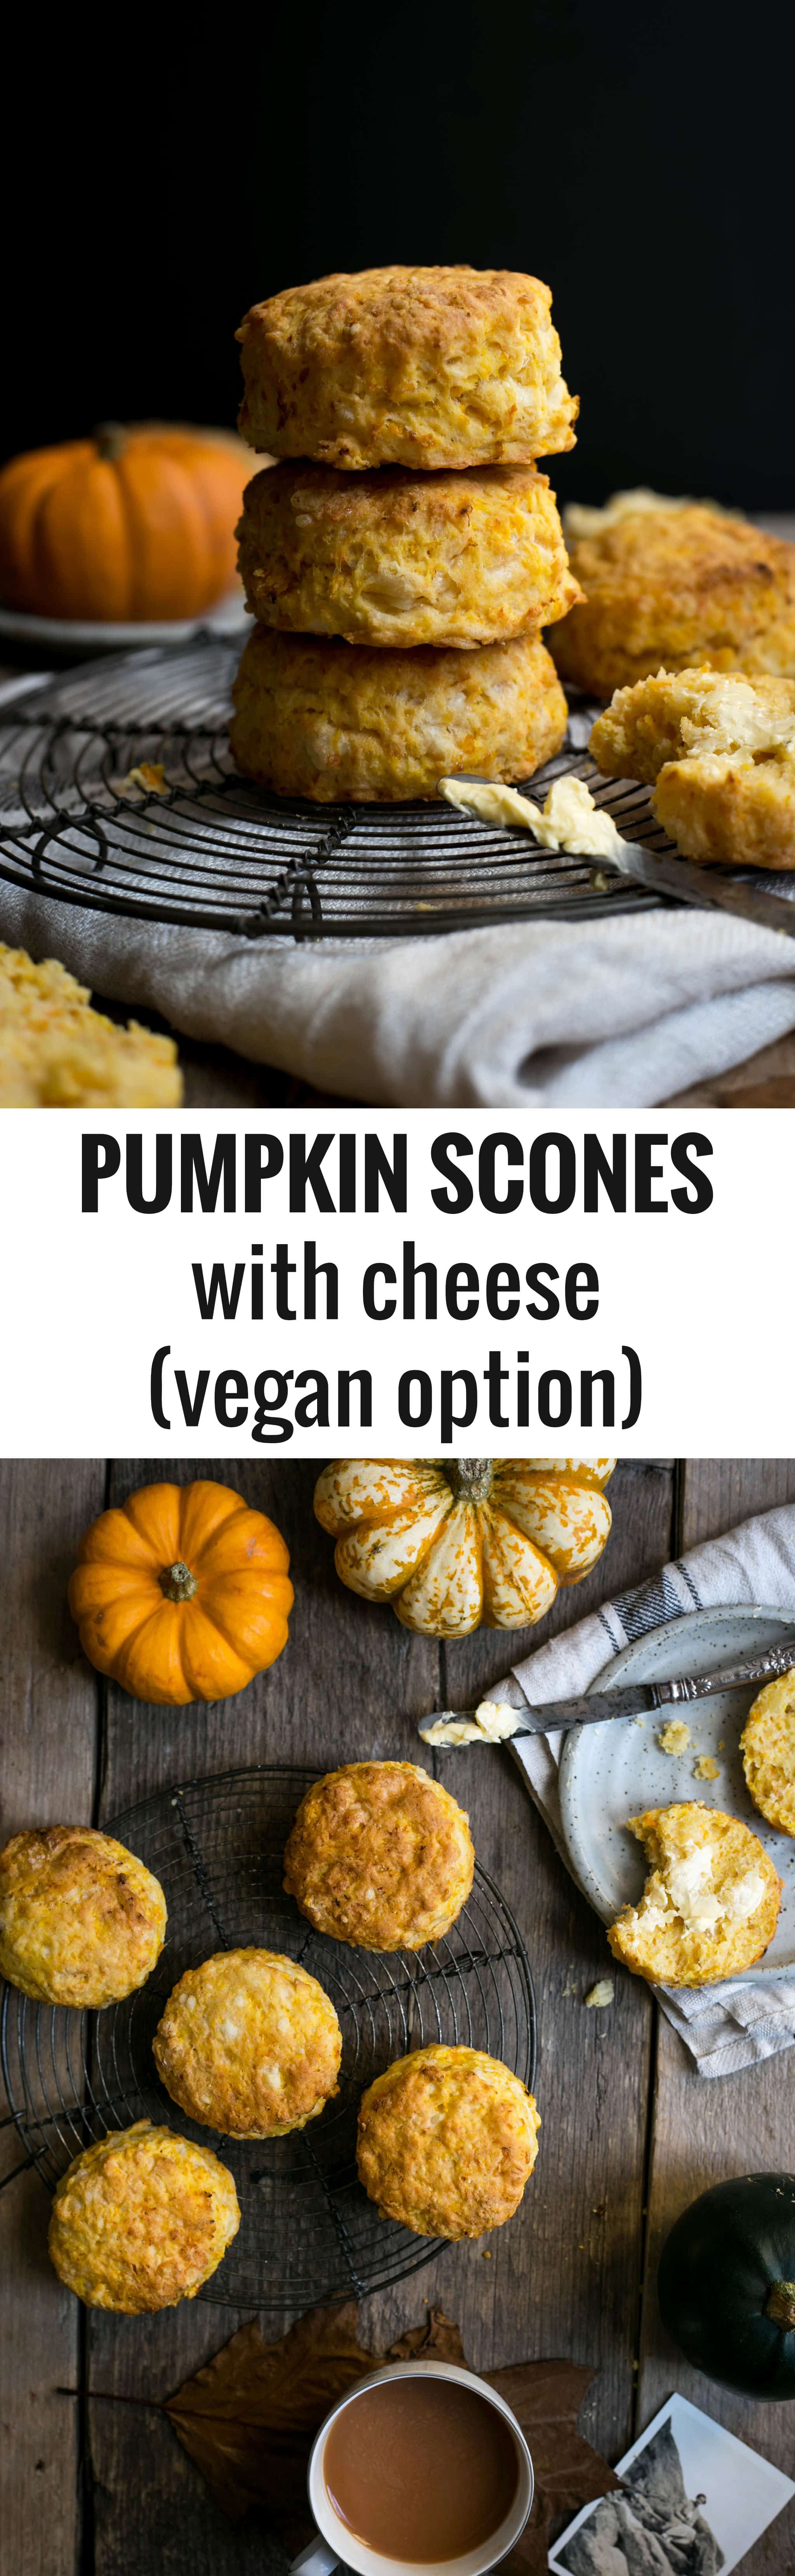 Easy and delicious #pumpkin scones with cheese! #vegan option! | via @annabanana.co